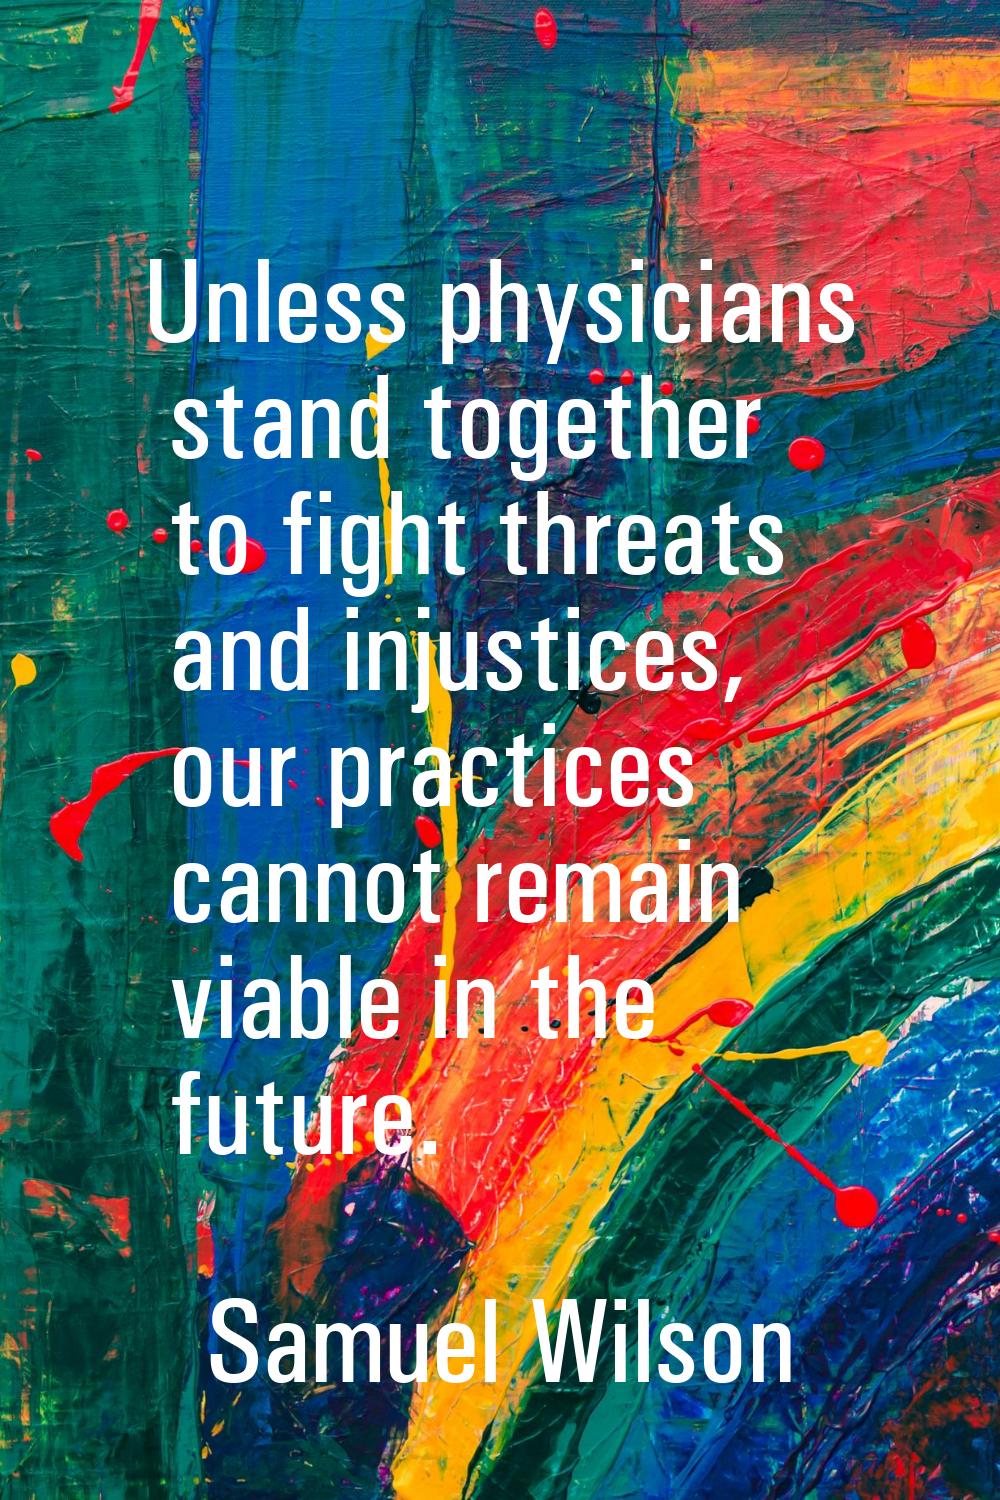 Unless physicians stand together to fight threats and injustices, our practices cannot remain viabl